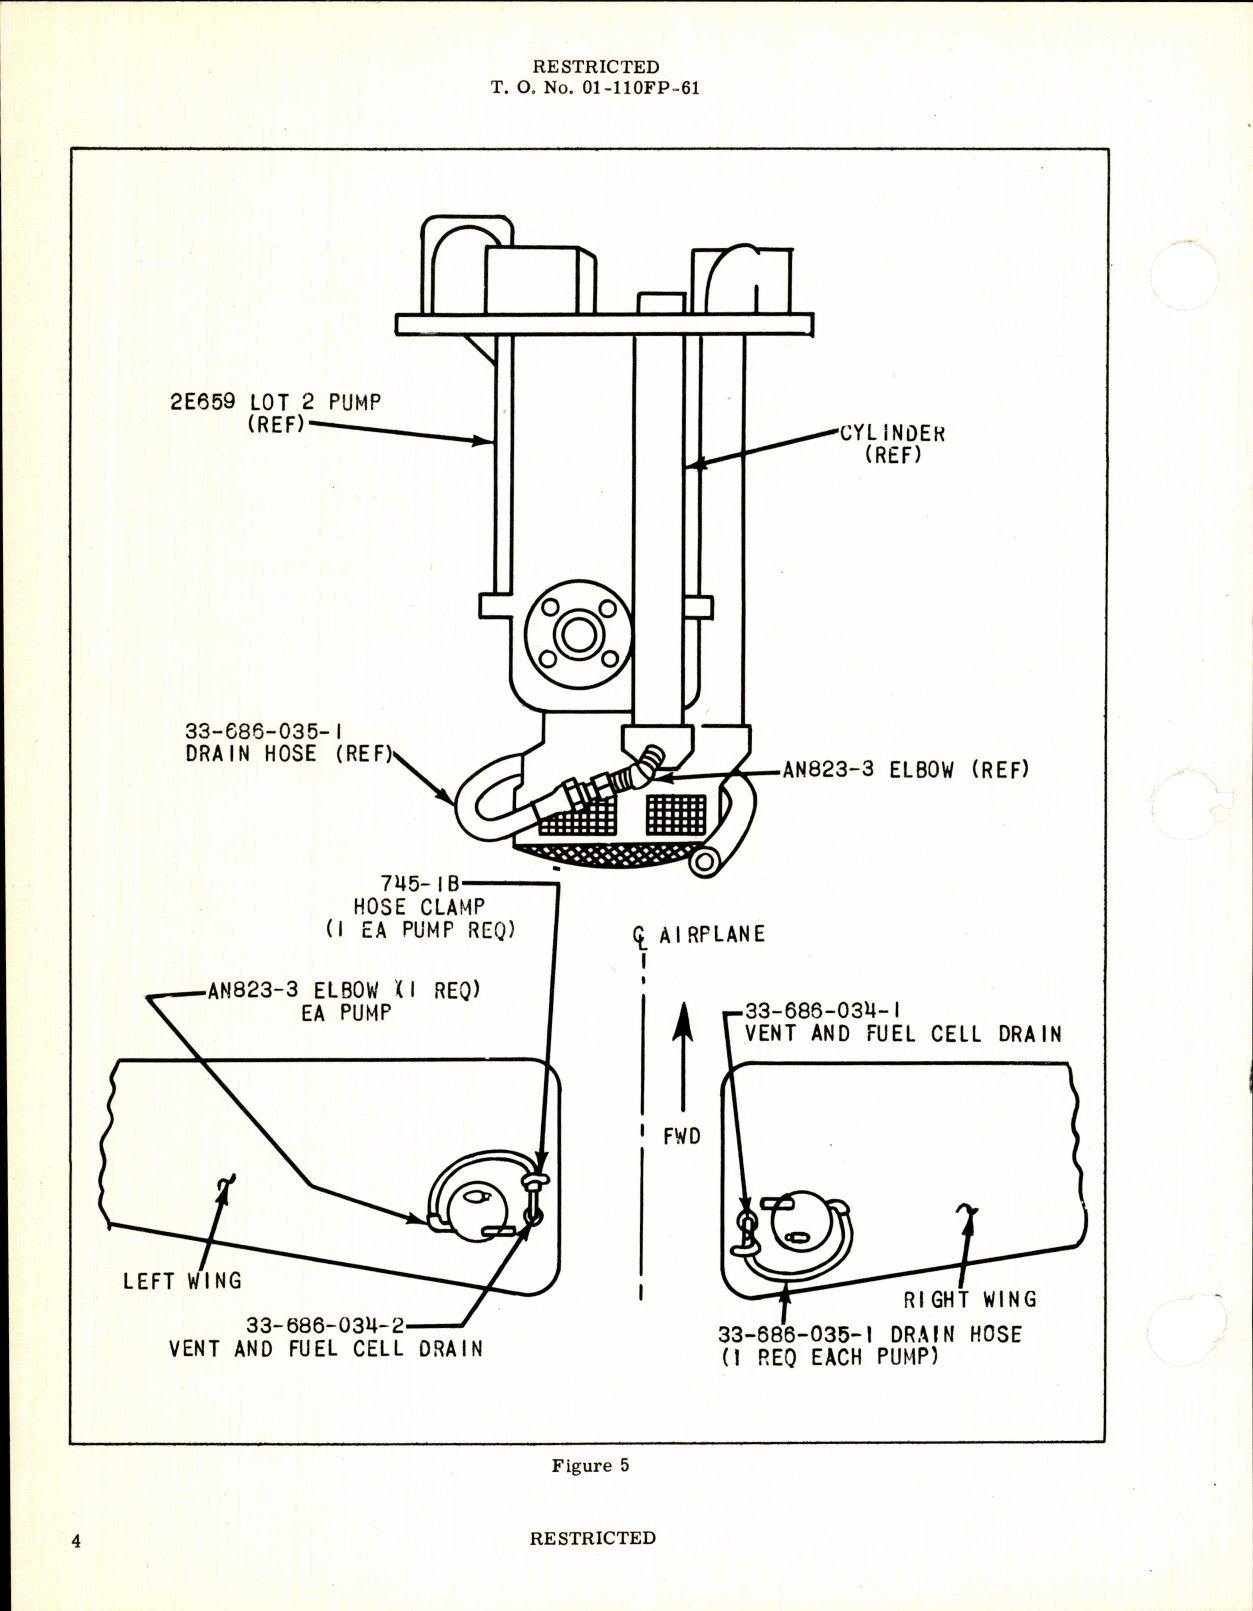 Sample page 4 from AirCorps Library document: Wing Fuel Cell Booster Pump & Modification of Vent System